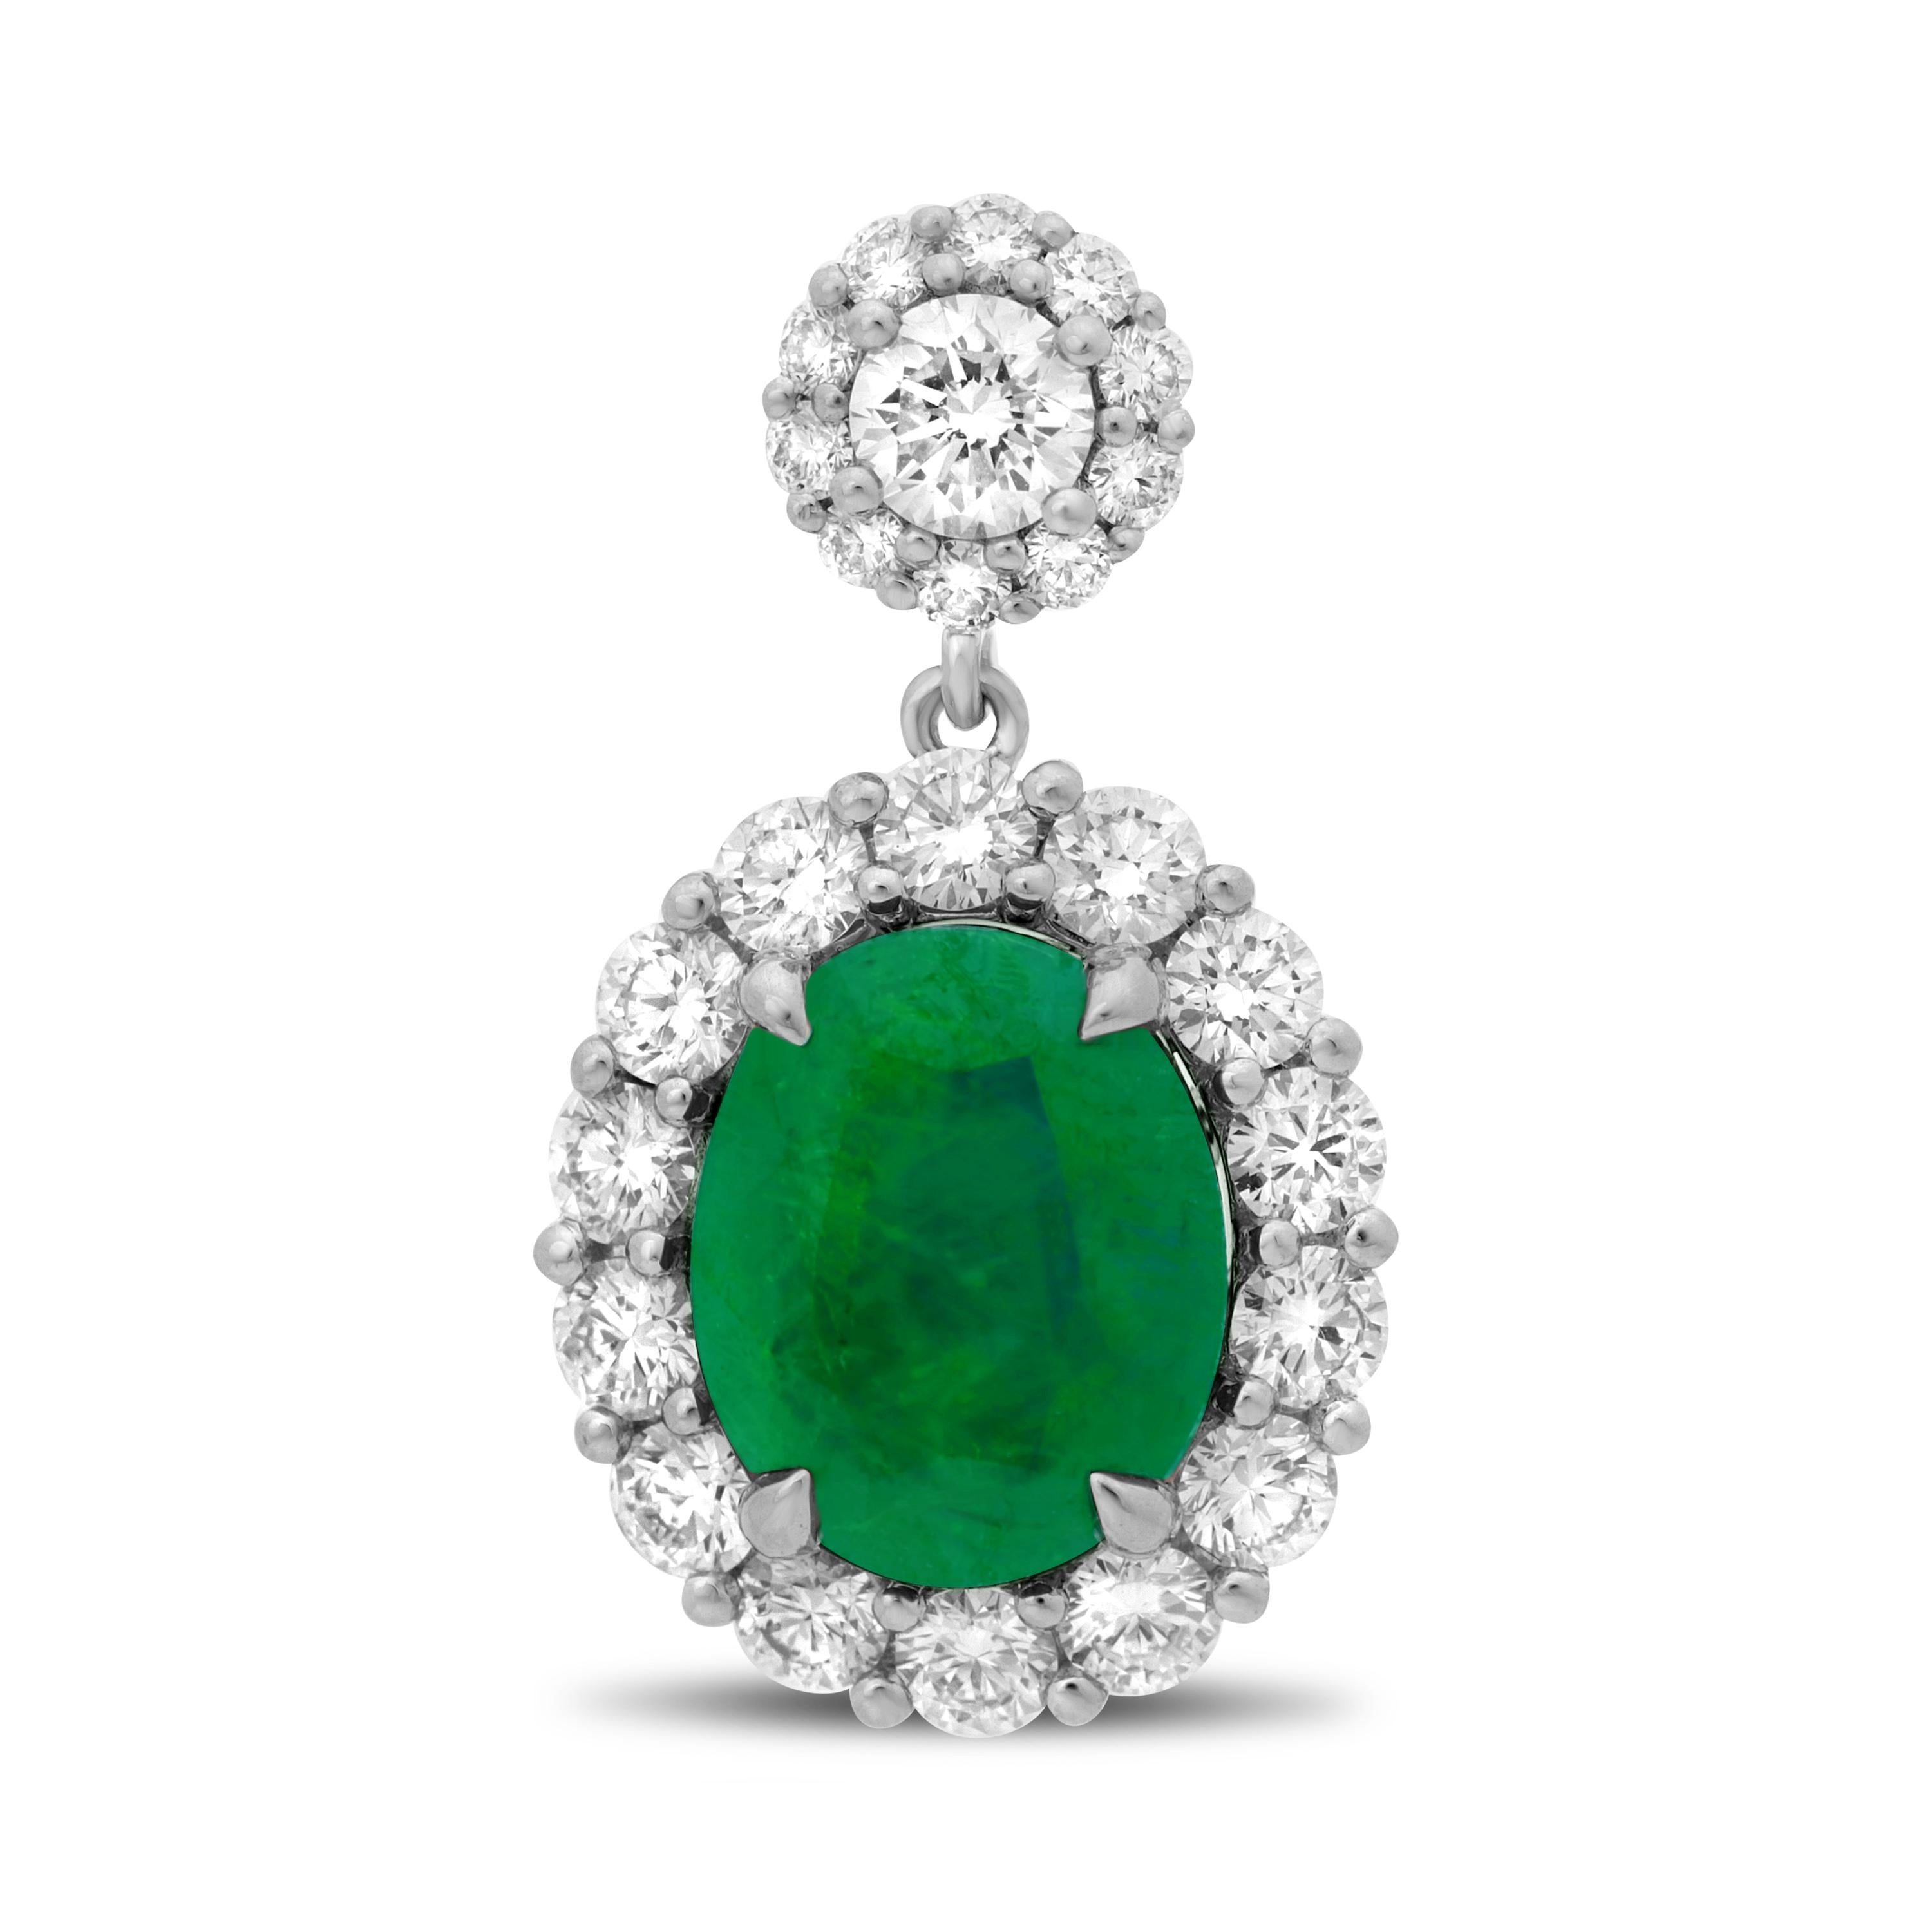 These classic drop earrings feature two elegant, oval cut, natural emeralds with a beautiful deep green color and 48 accent diamonds that total just over one carat. They are crafted from 18 karat white gold. 

Emeralds = oval, 2.19 carats 
Diamonds